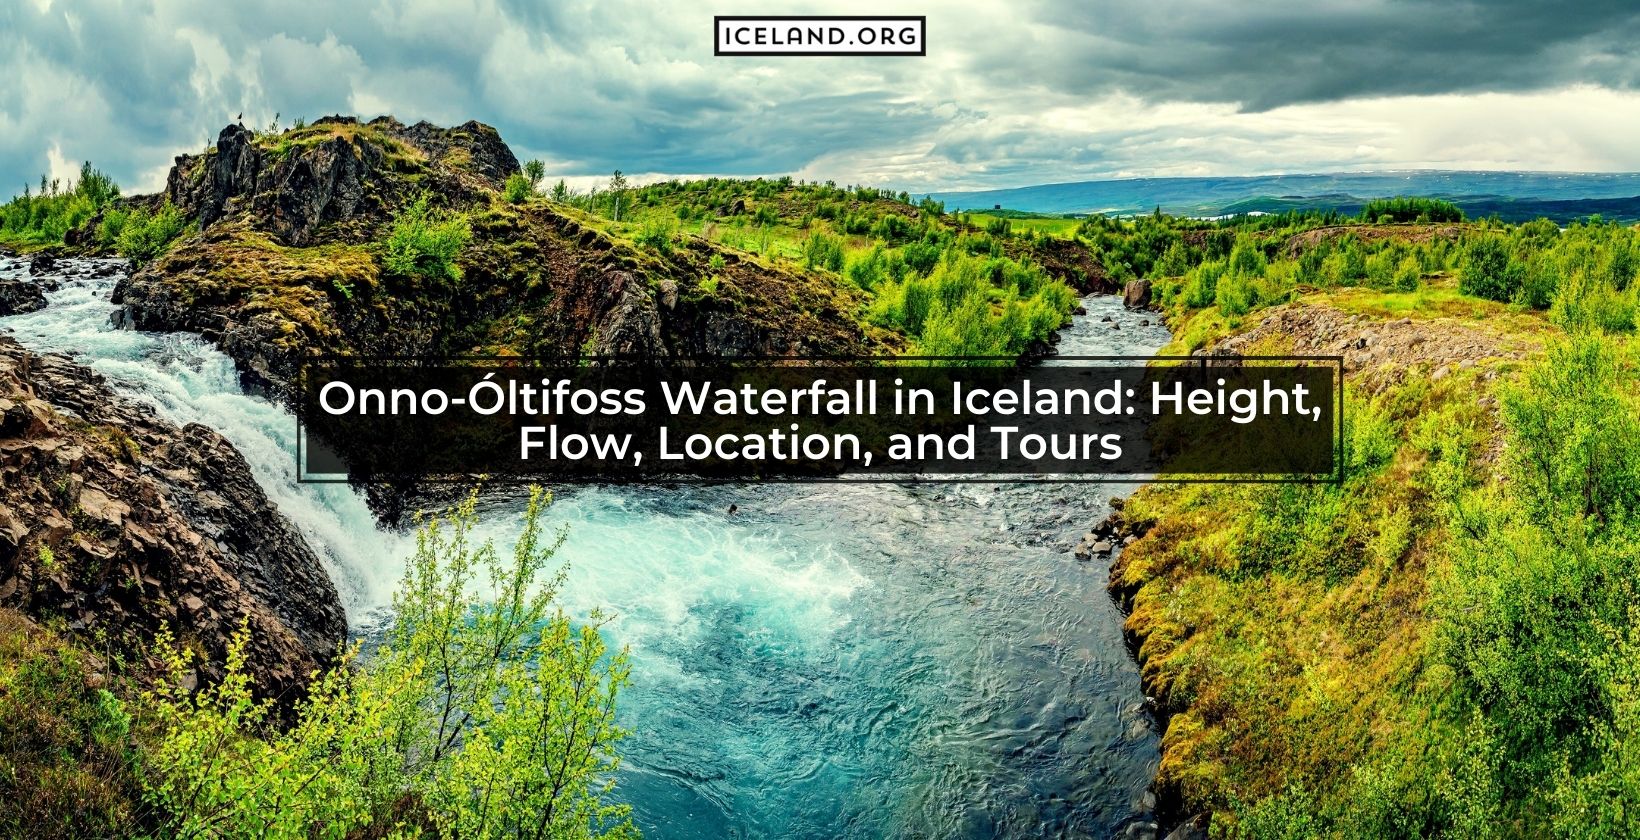 https://www.iceland.org/wp-content/uploads/2022/07/Onno-O%CC%81ltifoss-Waterfall-in-Iceland-Height-Flow-Location-and-Tours.jpeg